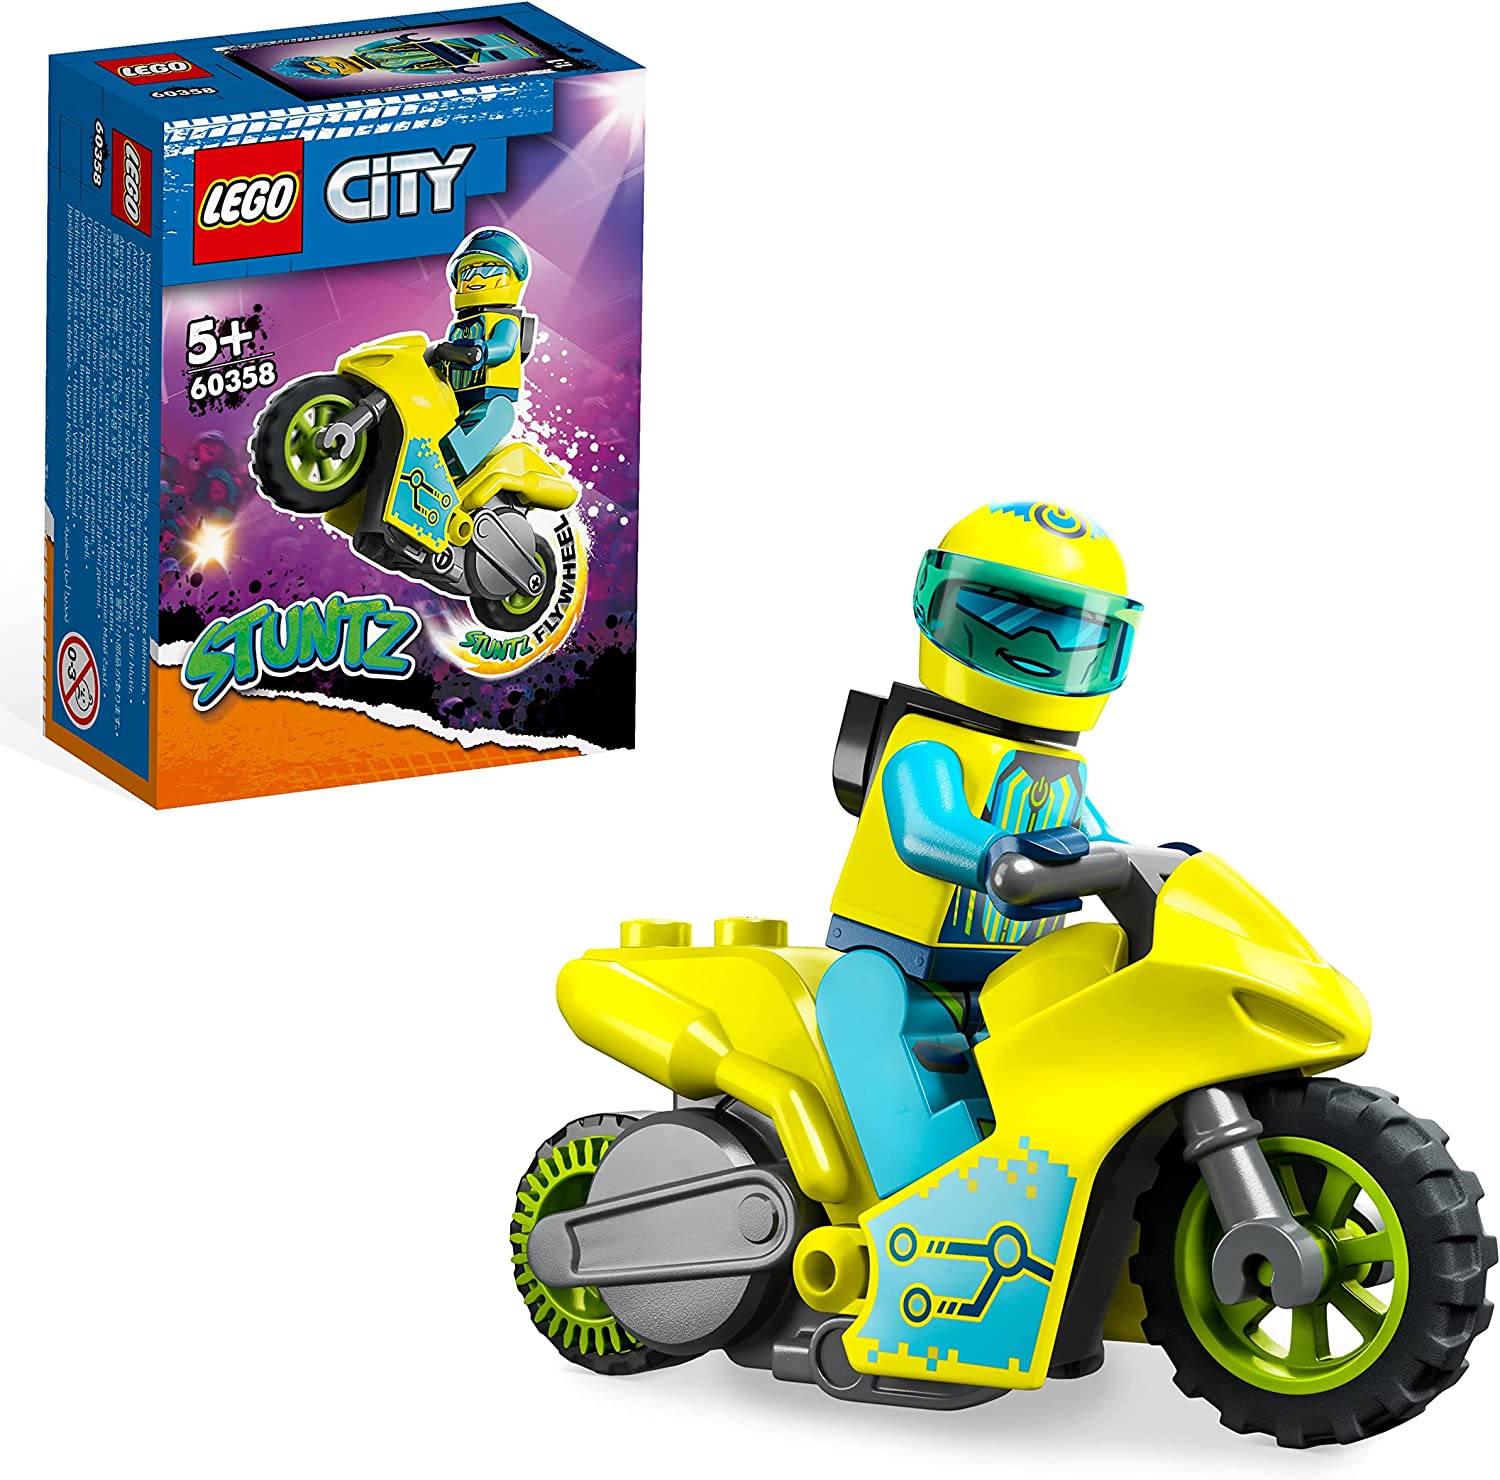 LEGO 60358 City Stuntz Cyber Stunt Bike, Flywheel Operated Toy Motorcycle for Exciting Jumps and Tricks, Small Gift for Kids or Expansion Set